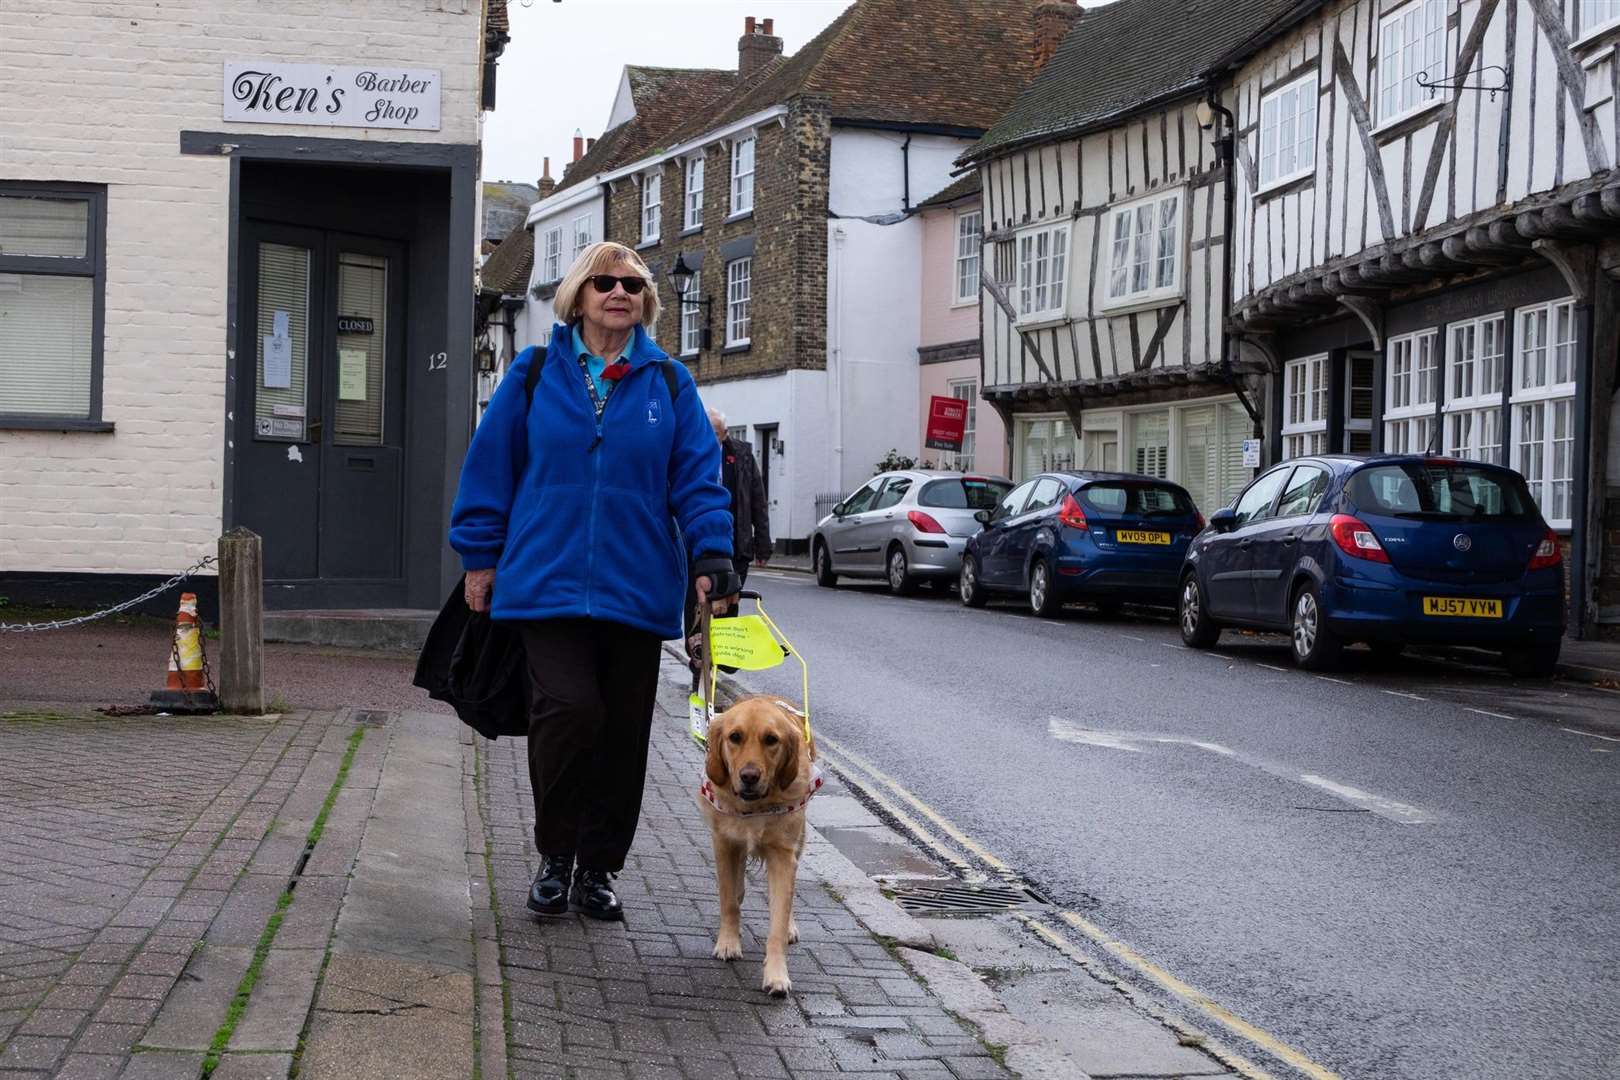 Patricia Poole, from Ash, was walking with her guide dog when they were lunged at by a Doberman